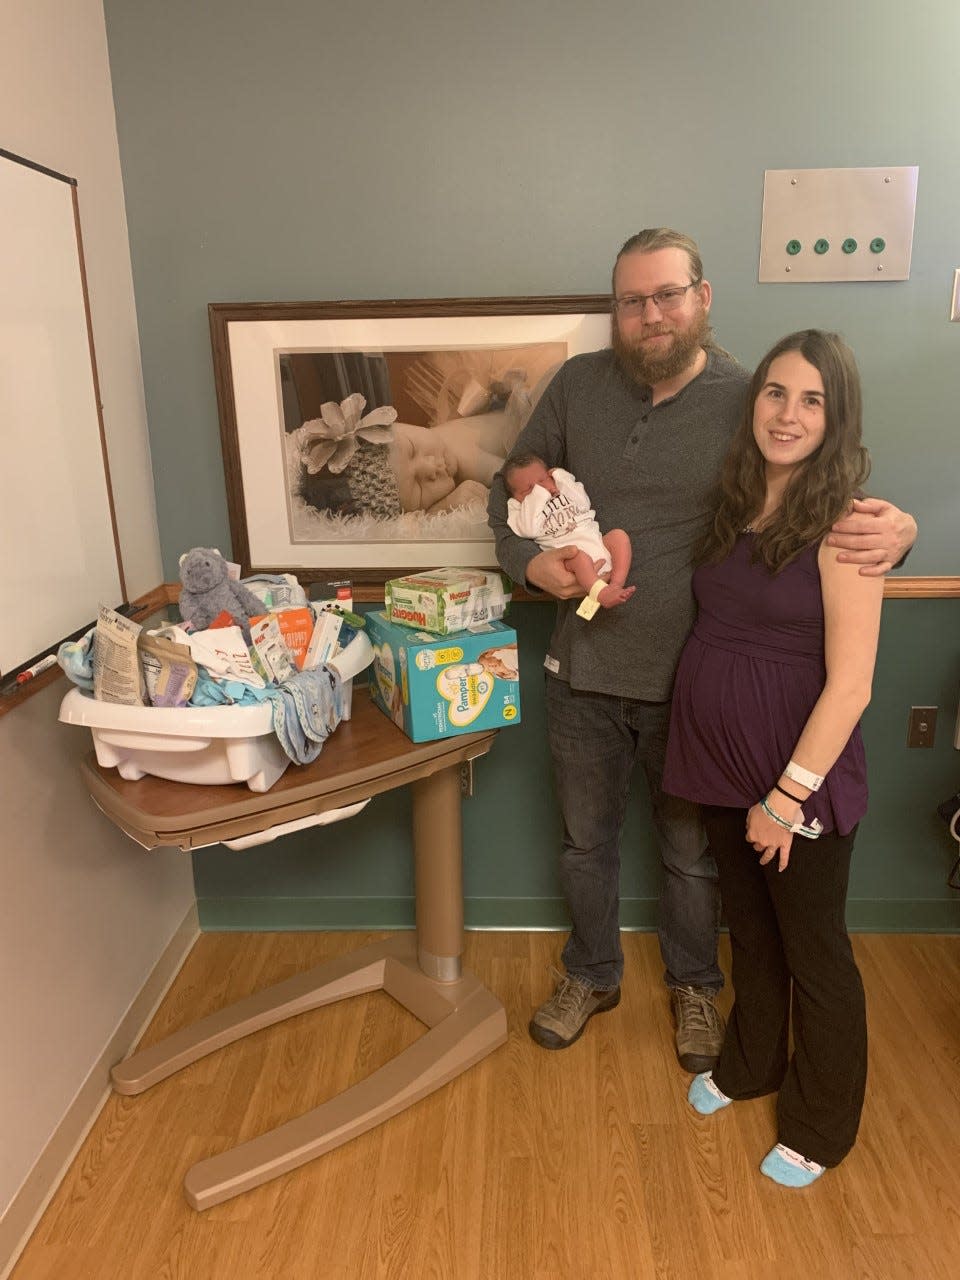 Alessandra Odette Mohlis entered the world on Jan. 1 at 12:03 a.m. at the Boone County Hospital, weighing 7 pounds and 0.3 ounces, with a length of 19 and ¾ inches. Parents are Auston and Megan Mohlis of Jewell. Alessandra is a rainbow baby, following the loss of her brother Kallum due to stillbirth in 2020.